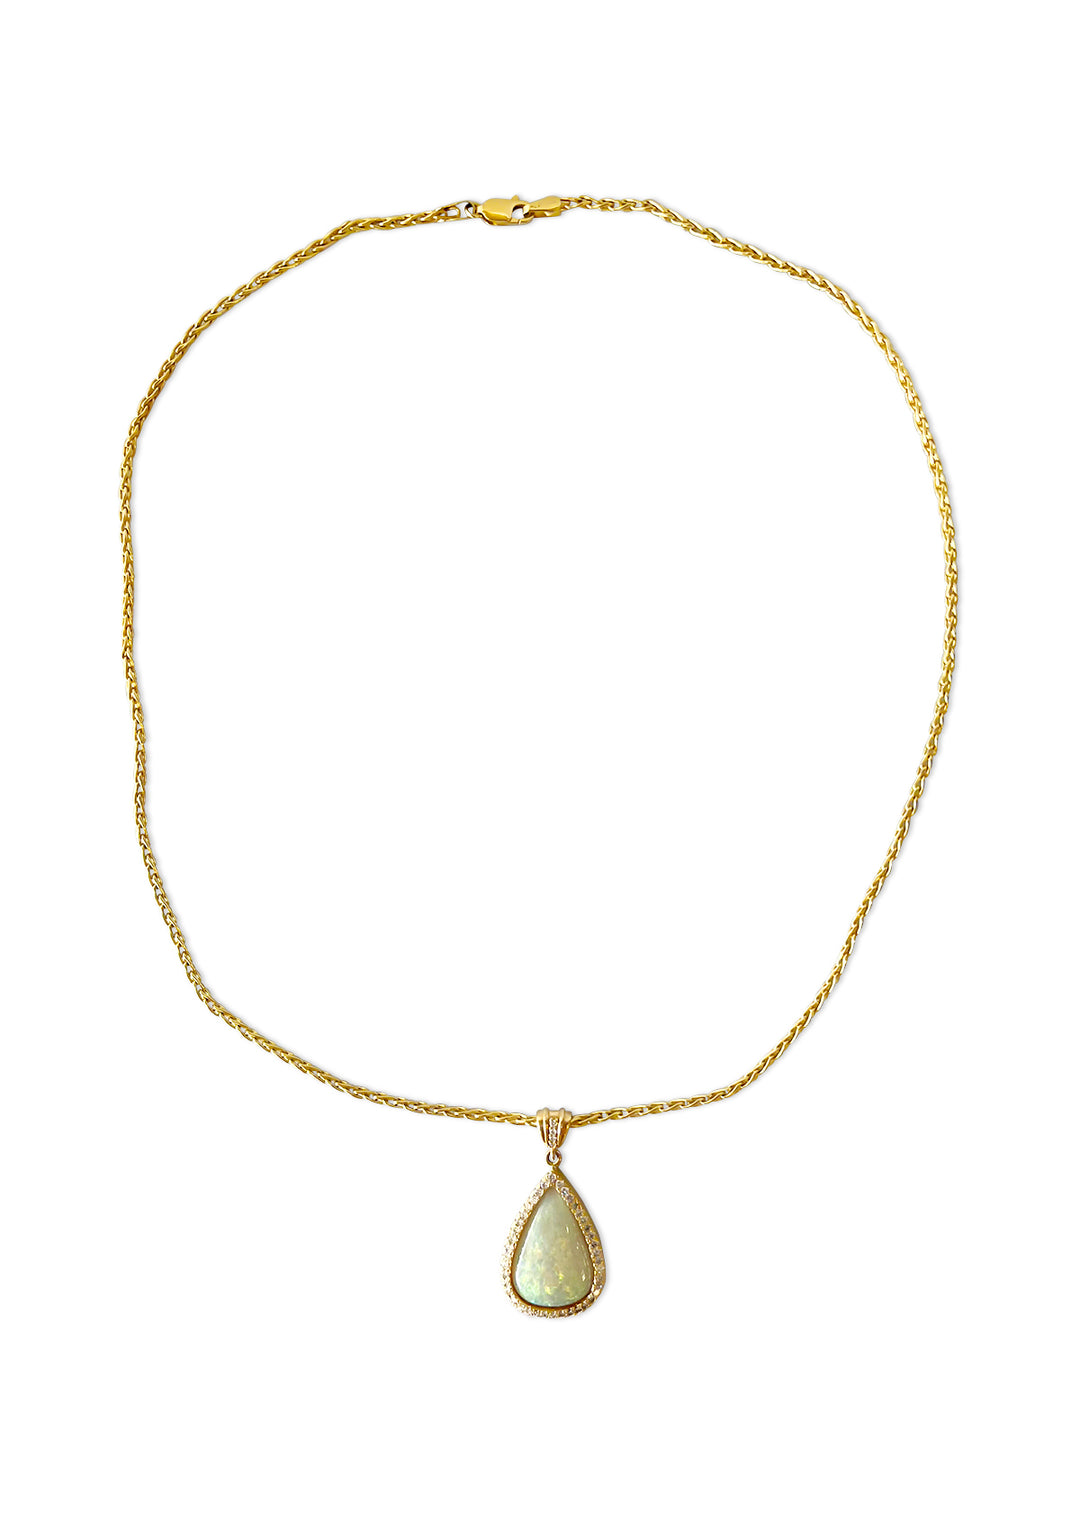 14K Yellow Gold 7.70 Carat Opal And Diamond Necklace